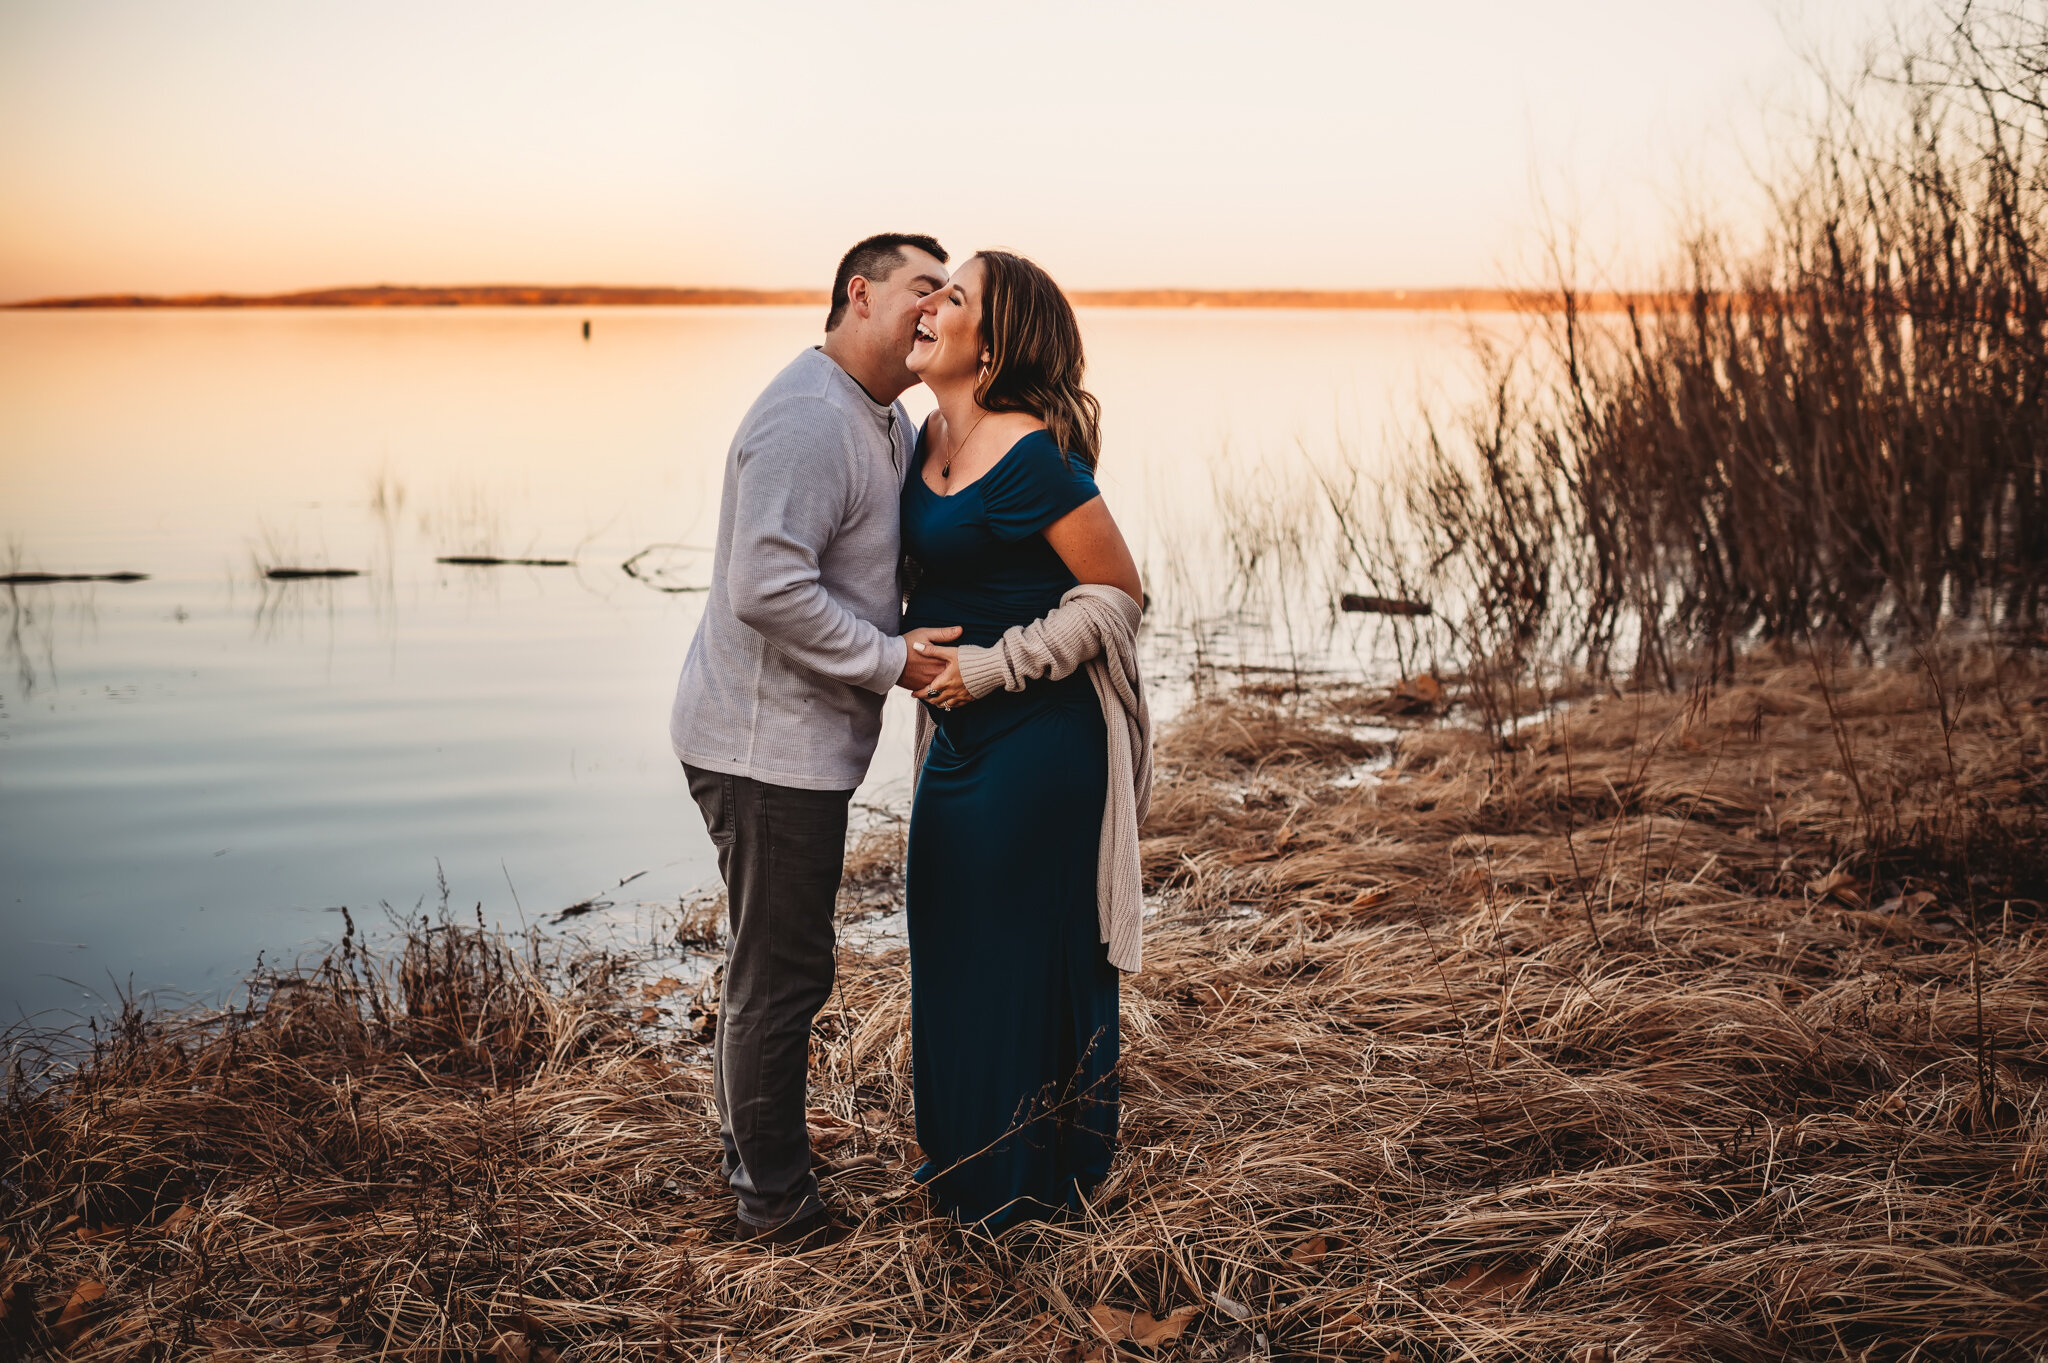 Peoria Illinois maternity photos, couple stands near river kissing and laughing during maternity photoshoot